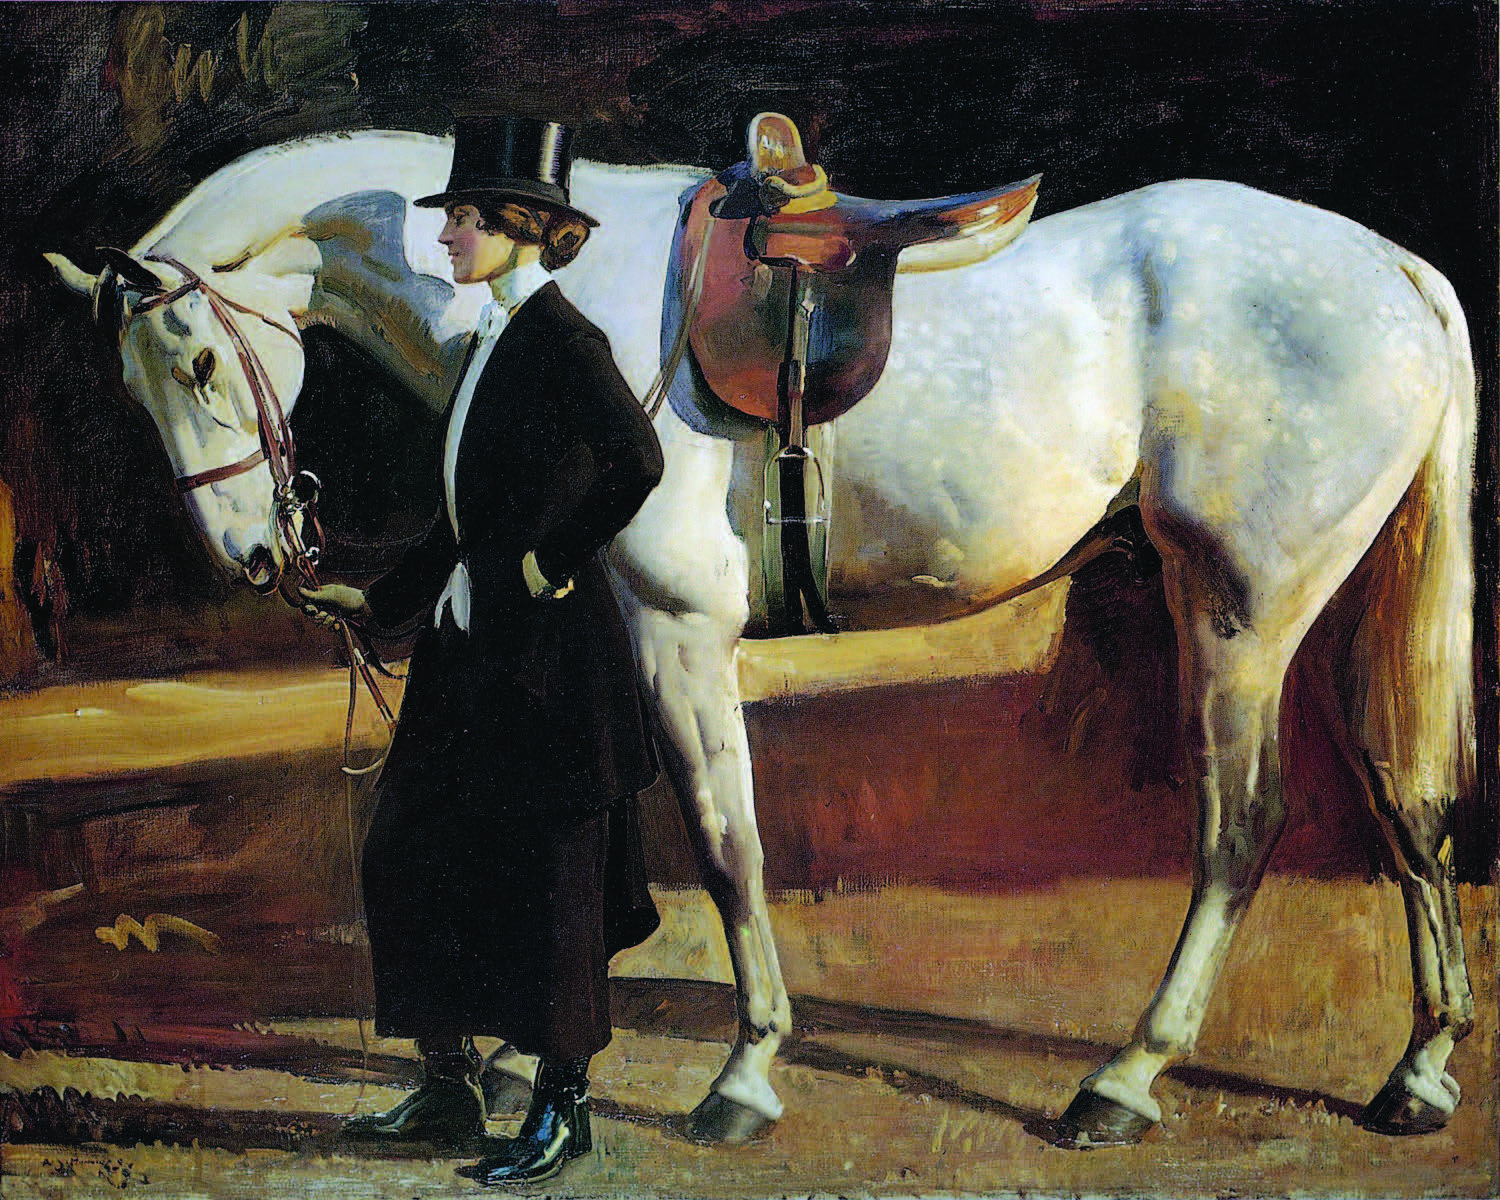 Impressions On A Munnings Exhibition: Featuring The National Sporting Library & Museum, Middleburg, VA